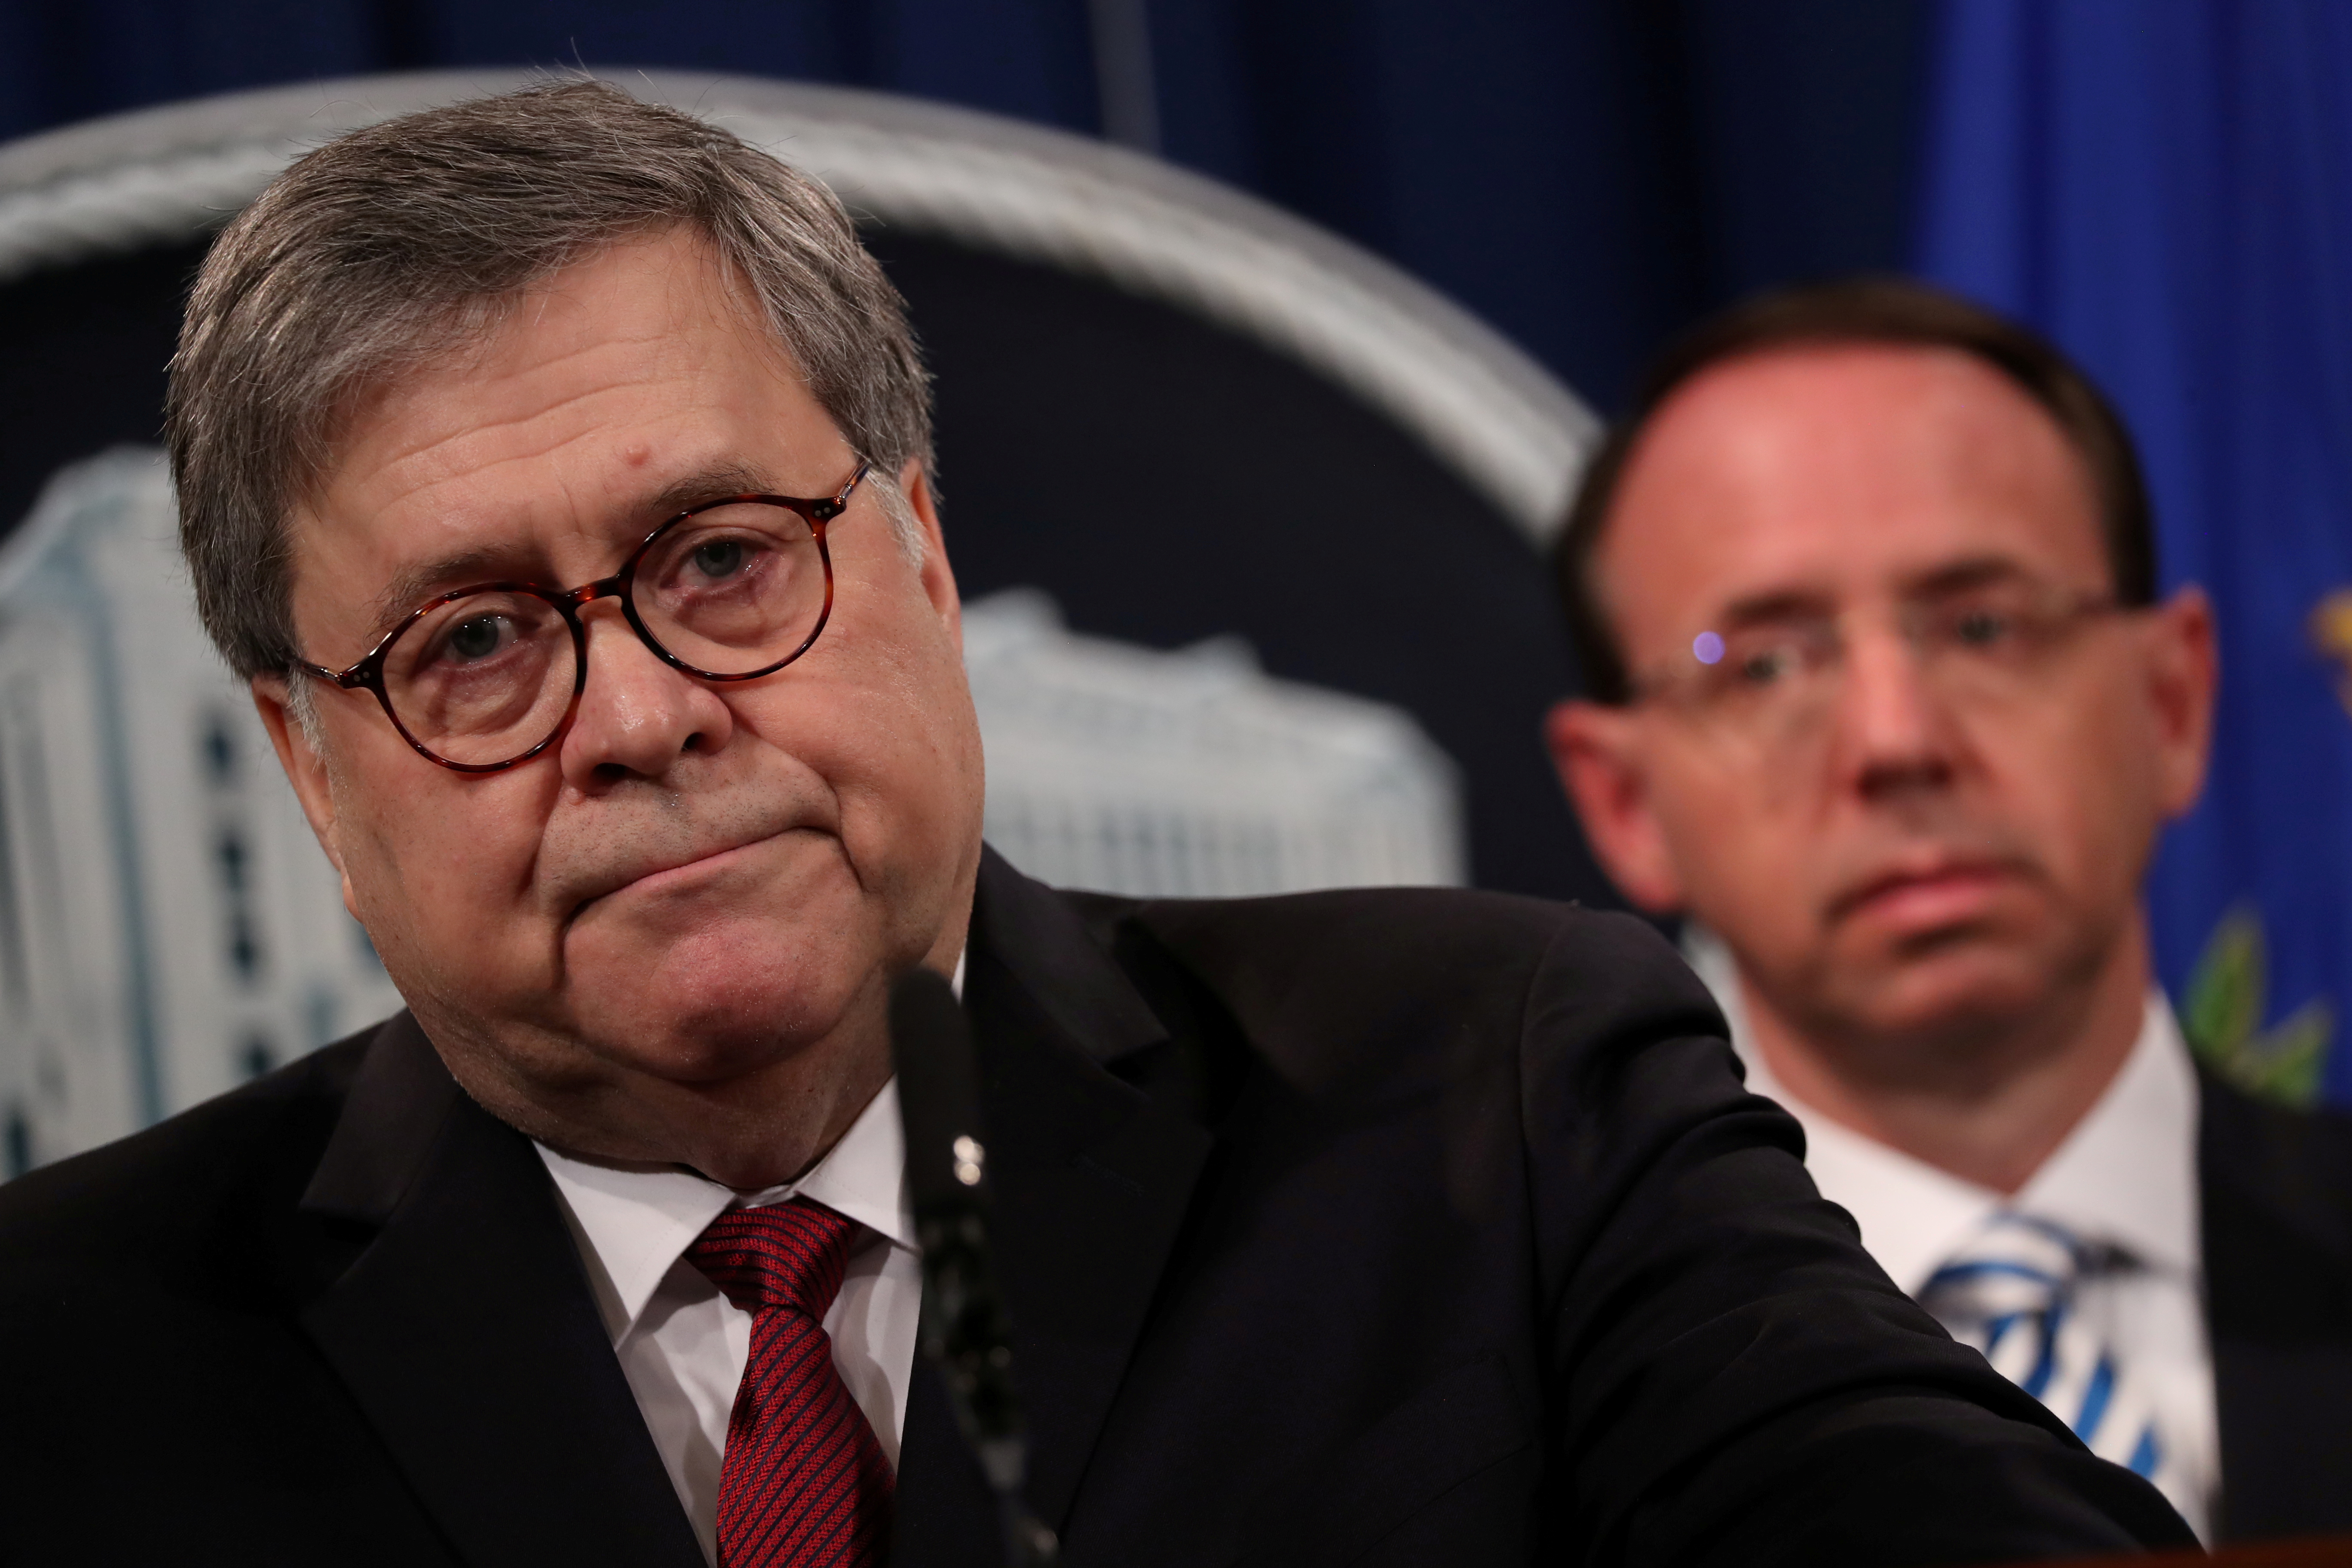 U.S. Attorney General William Barr, flanked by Deputy U.S. Attorney General Rod Rosenstein, speaks at a news conference to discuss Special Counsel Robert Mueller’s report on Russian interference in the 2016 U.S. presidential race, in Washington, U.S., April 18, 2019. REUTERS/Jonathan Ernst